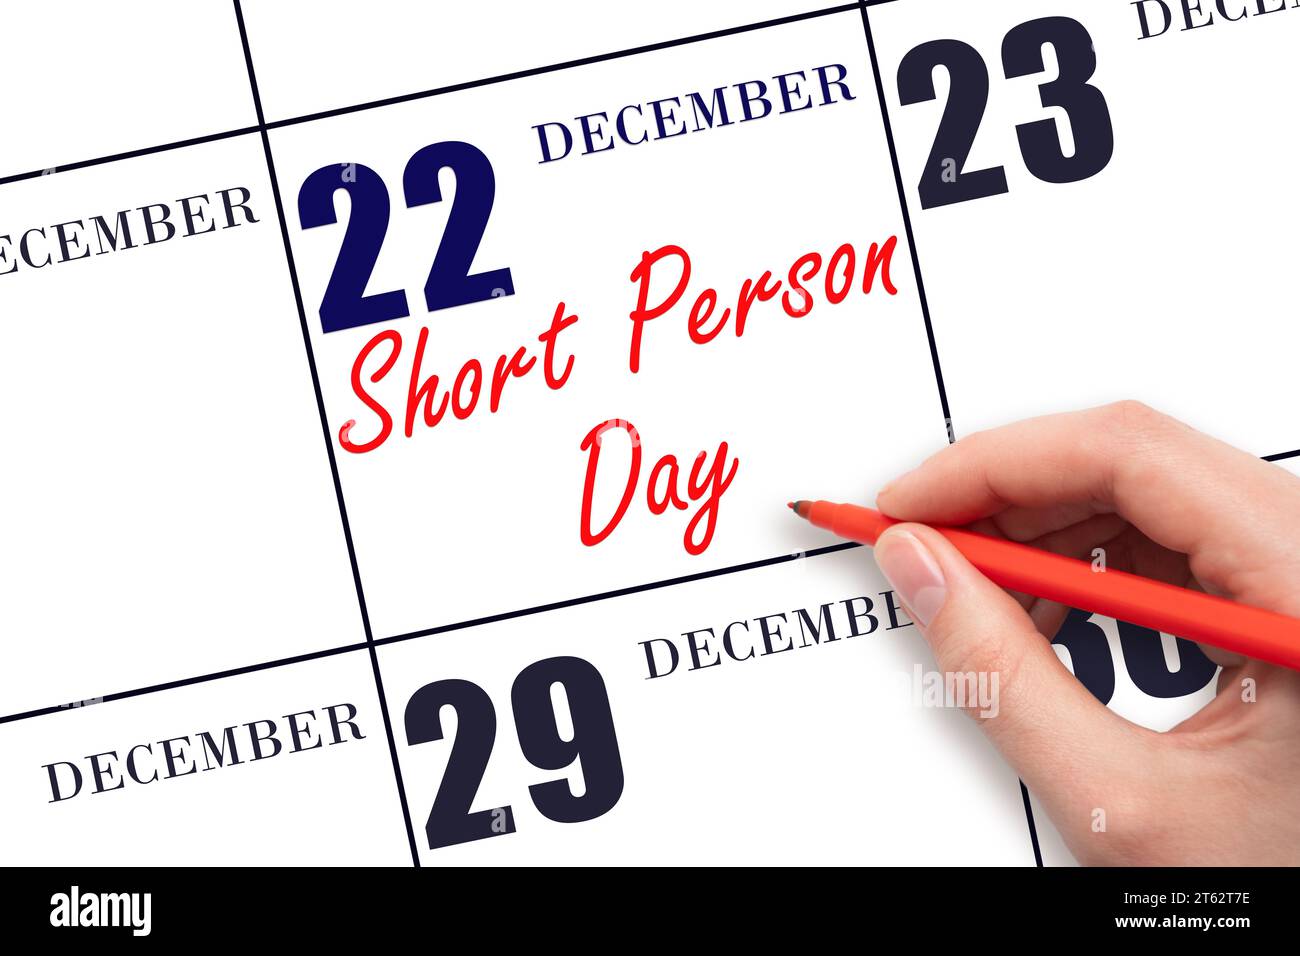 December 22. Hand writing text Short Person Day on calendar date. Save the date. Holiday. Day of the year concept. Stock Photo